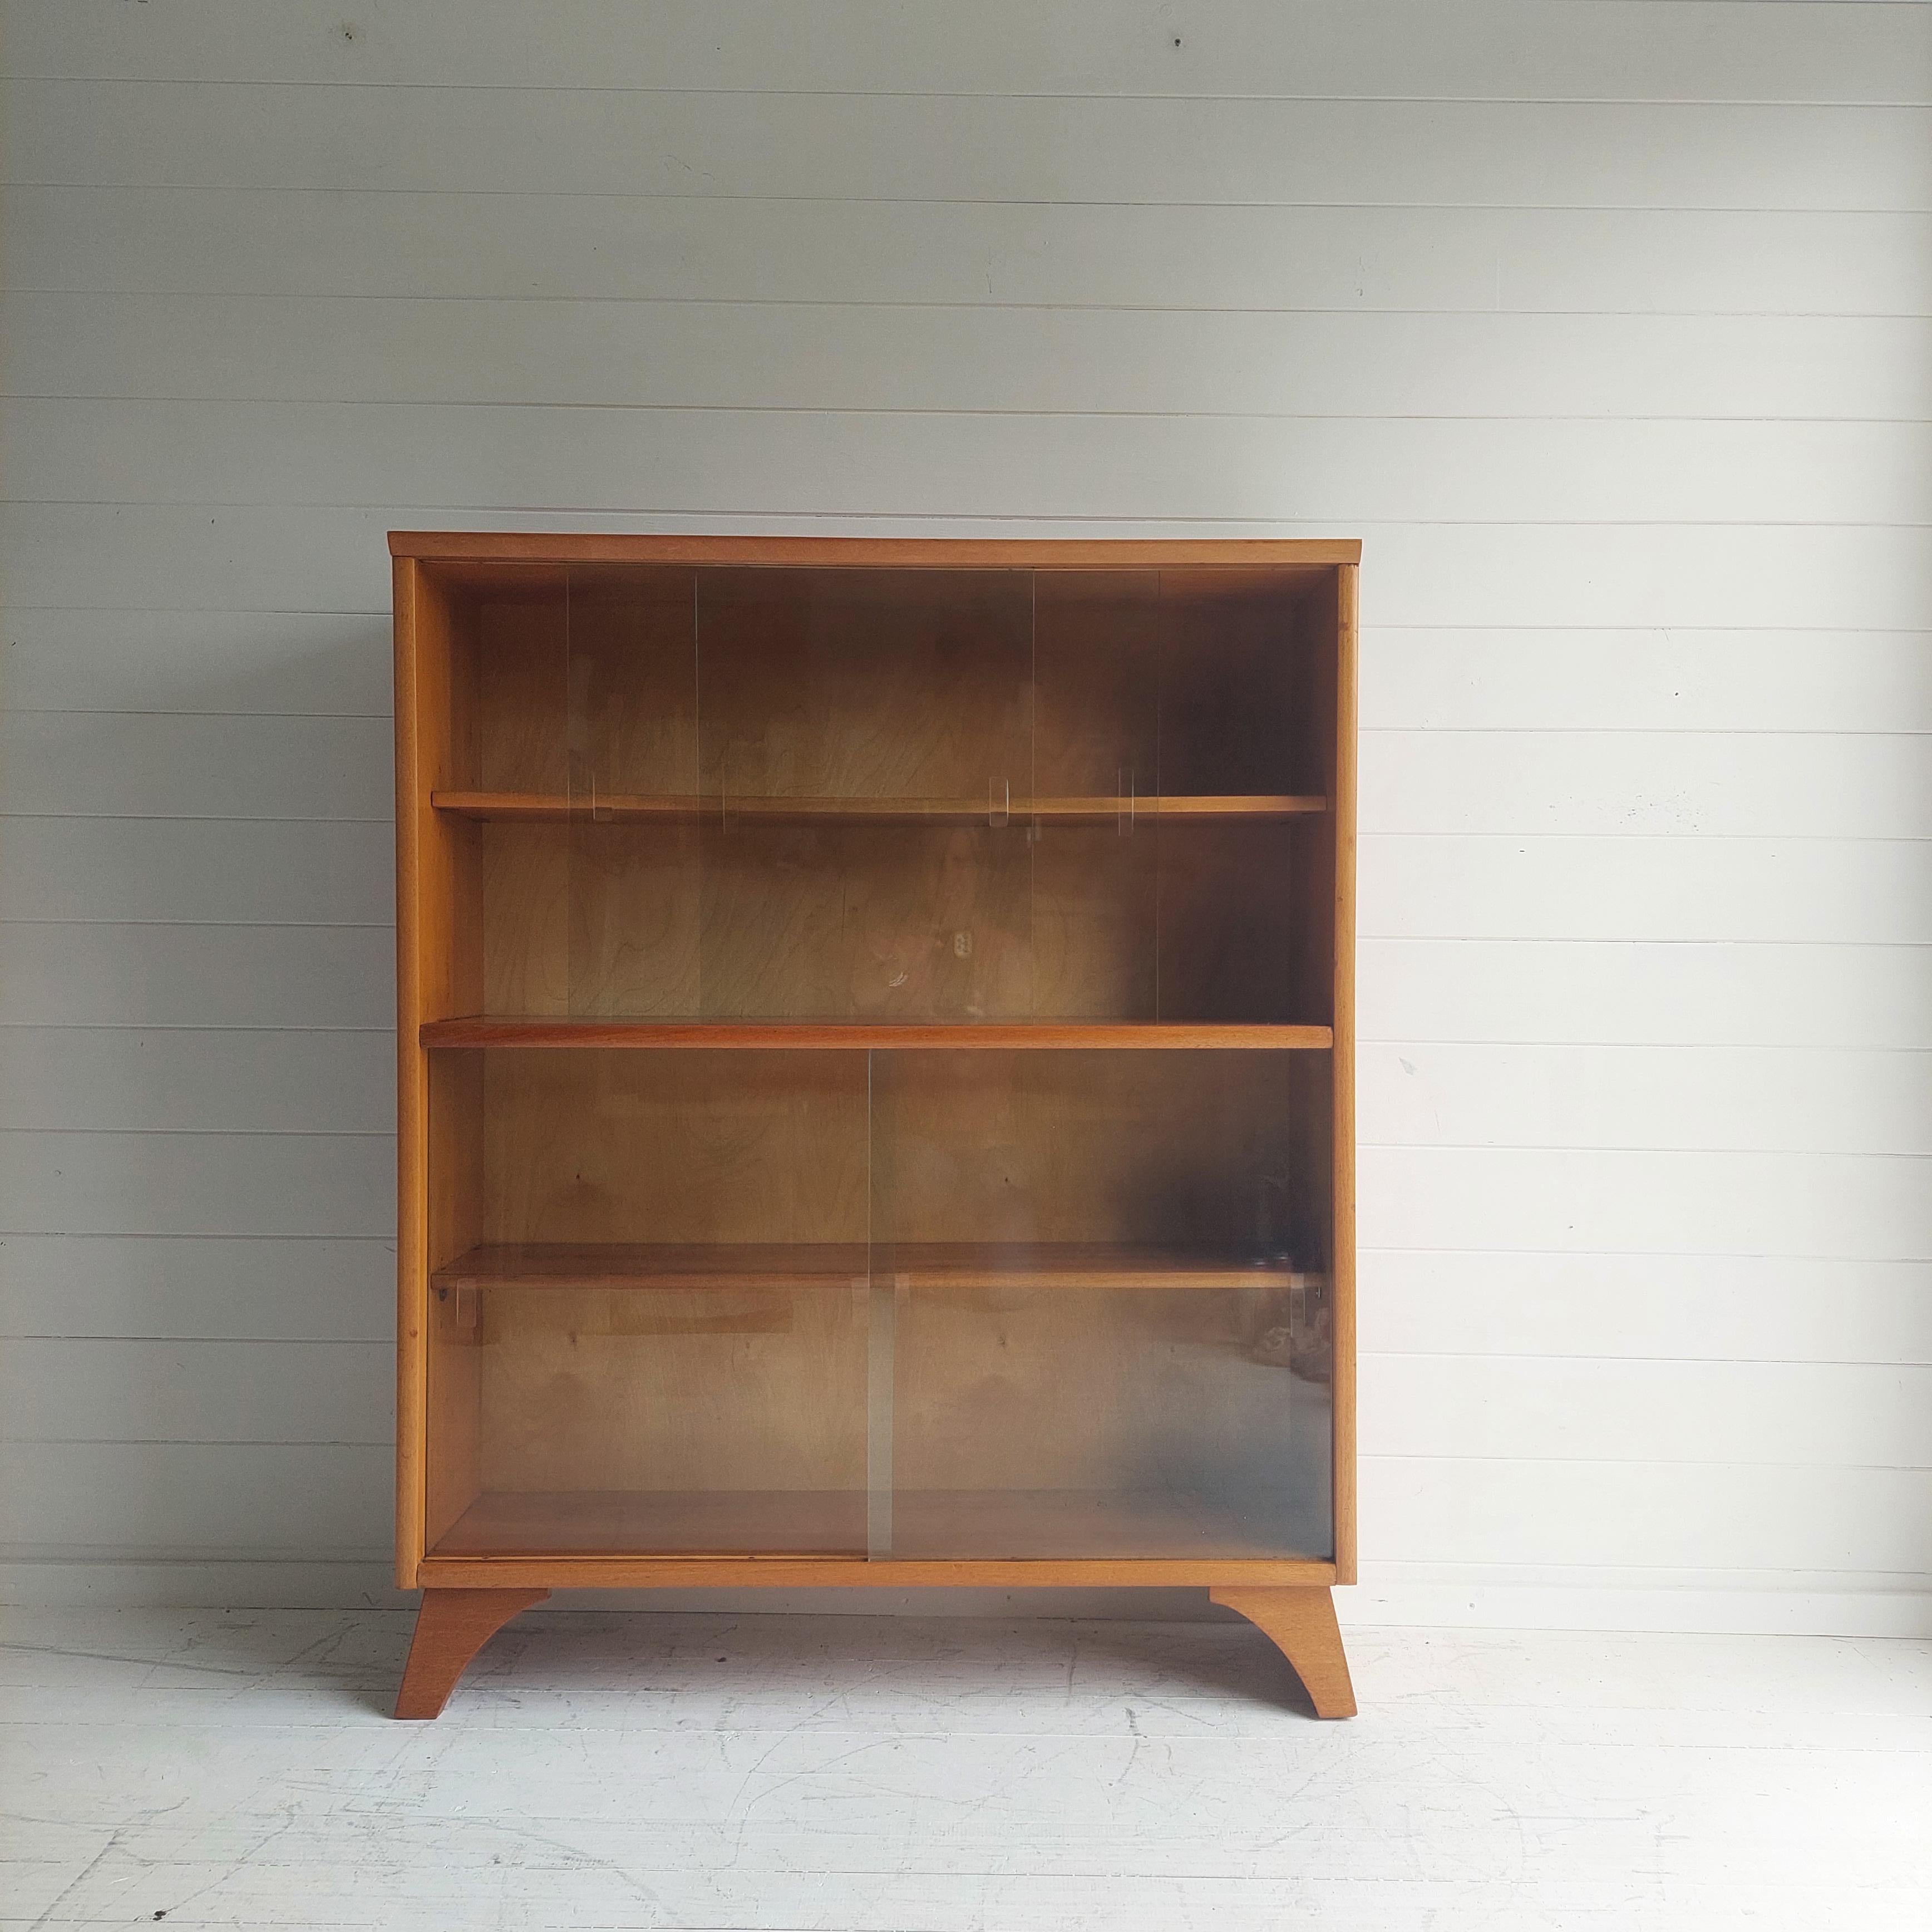 An excellent example of an original mid century double height glazed bookcase/ unit produced by Herbert E Gibbs.
Produced in the 1960’s this is solid teak, completely original and in excellent condition.

It has both of its original sliding glass